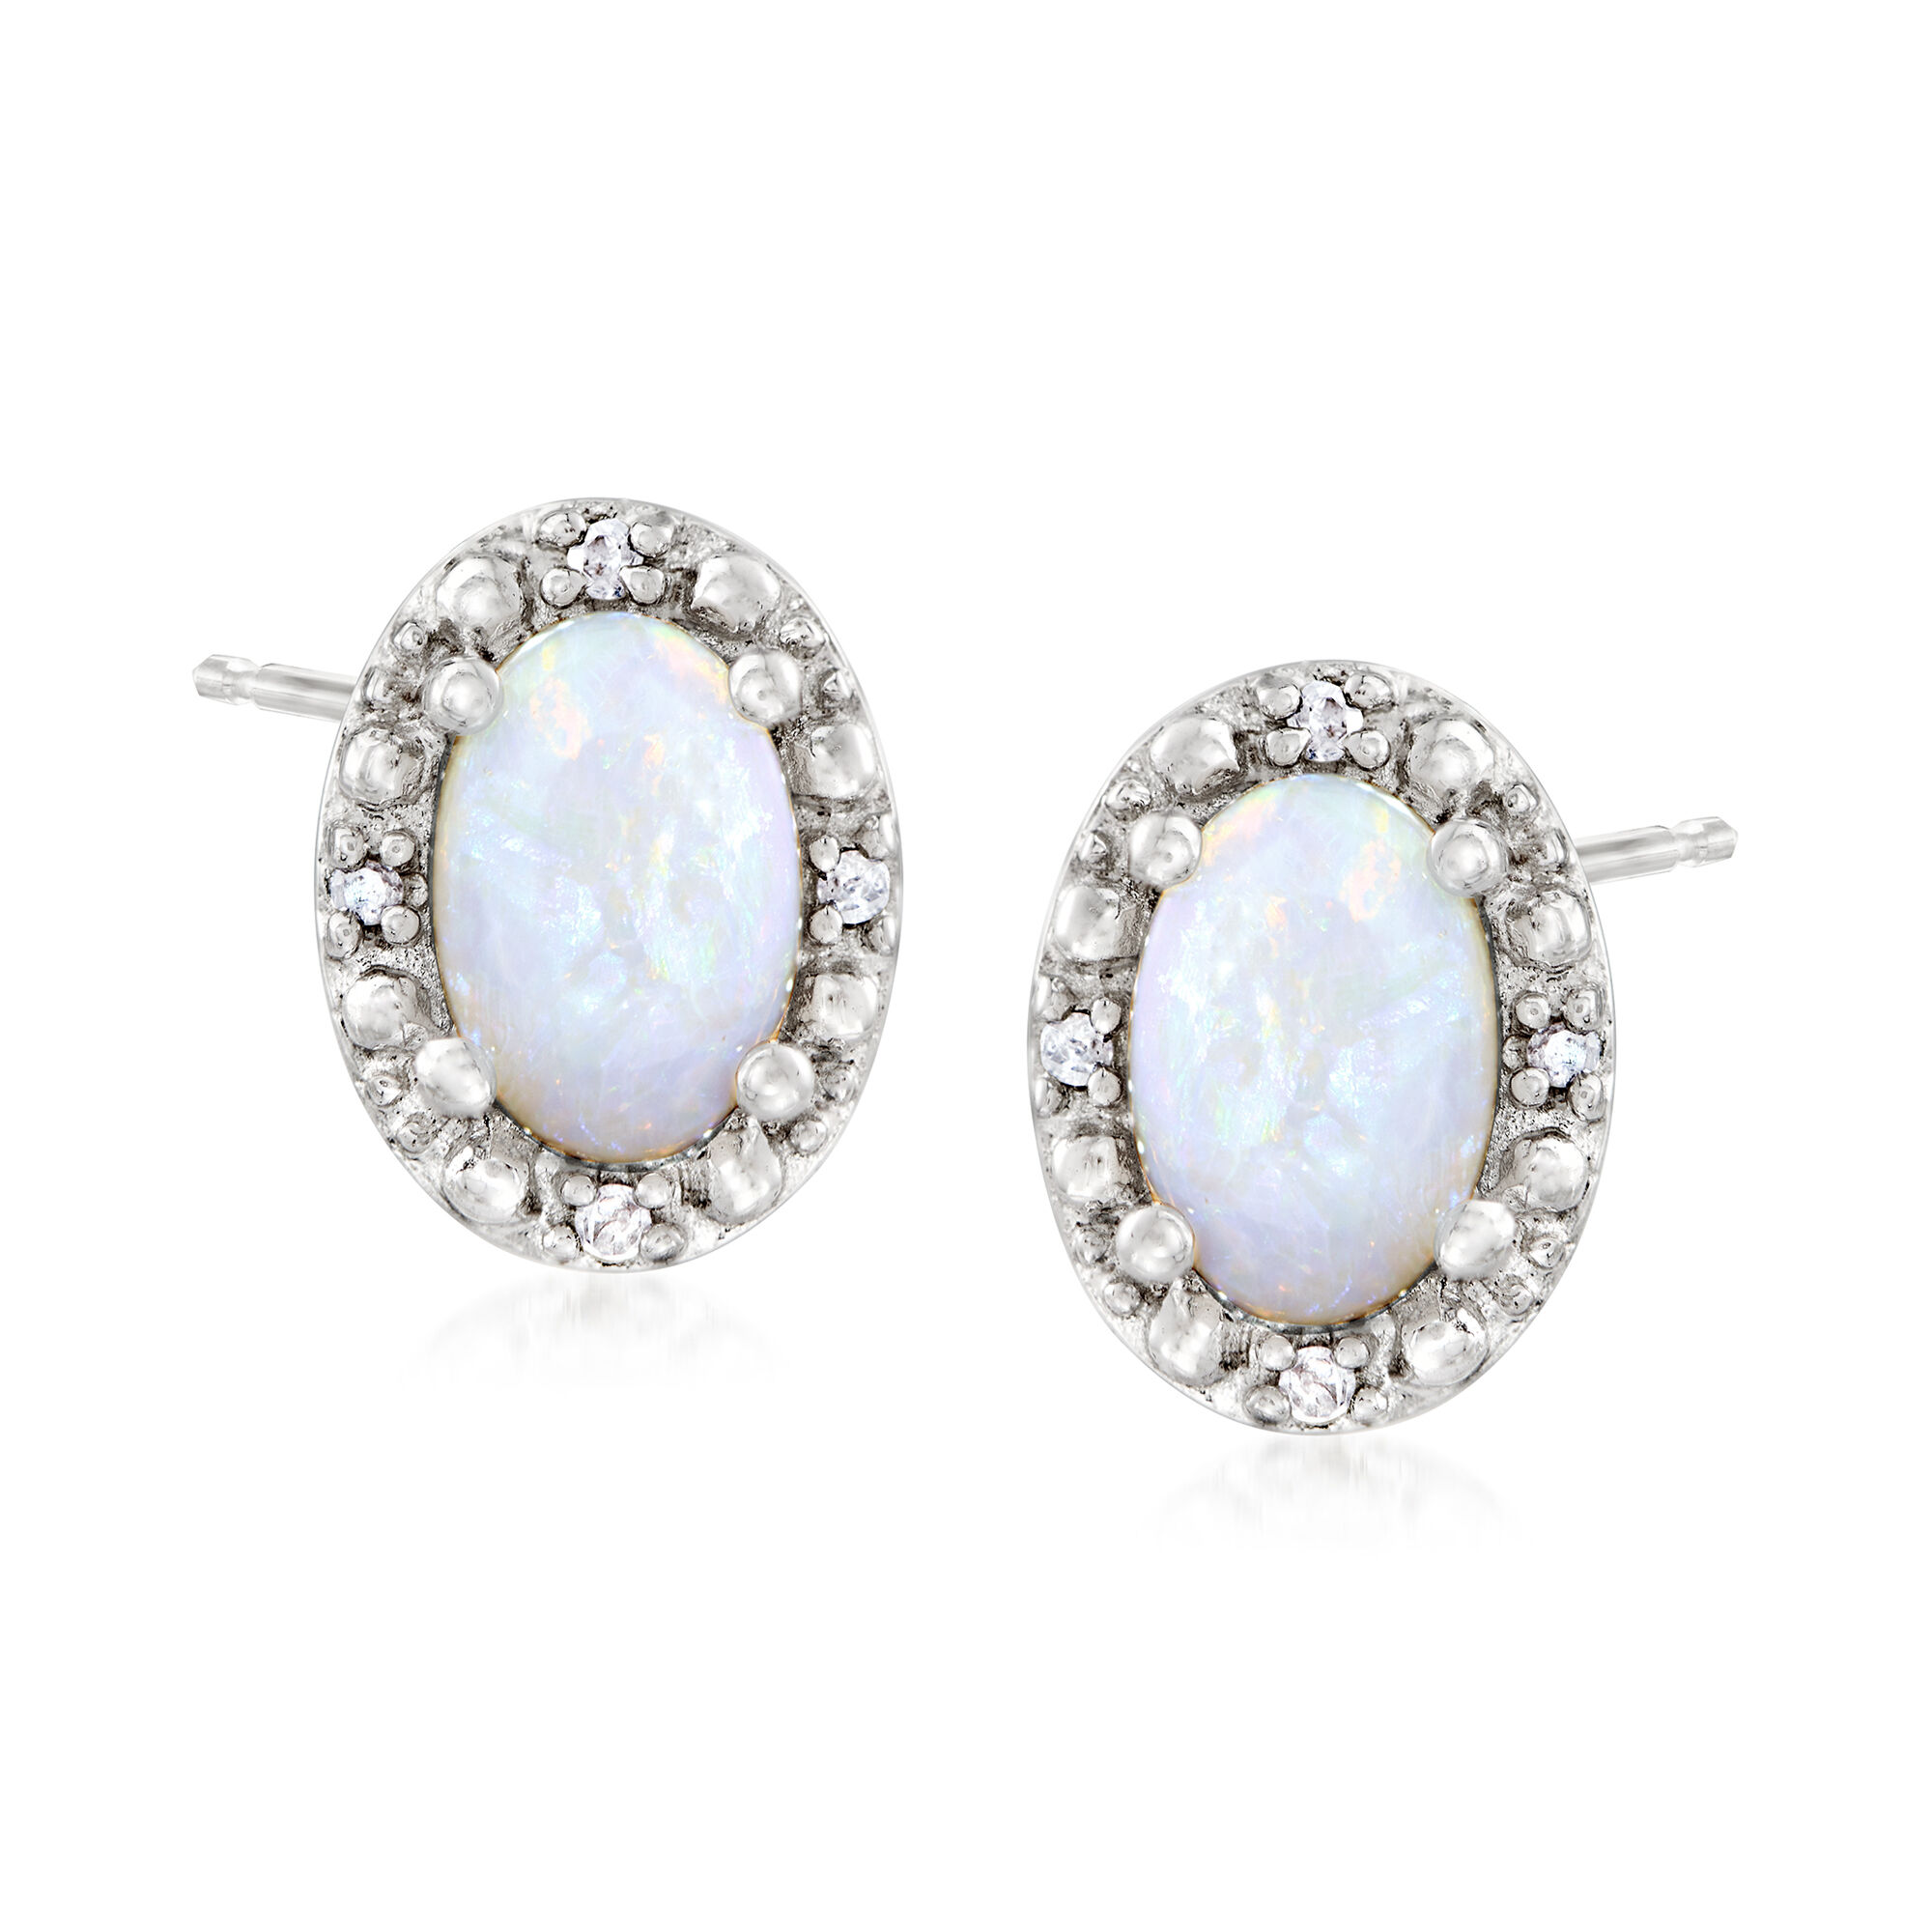 Opal Stud Earrings with Diamond Accents in Sterling Silver | Ross 